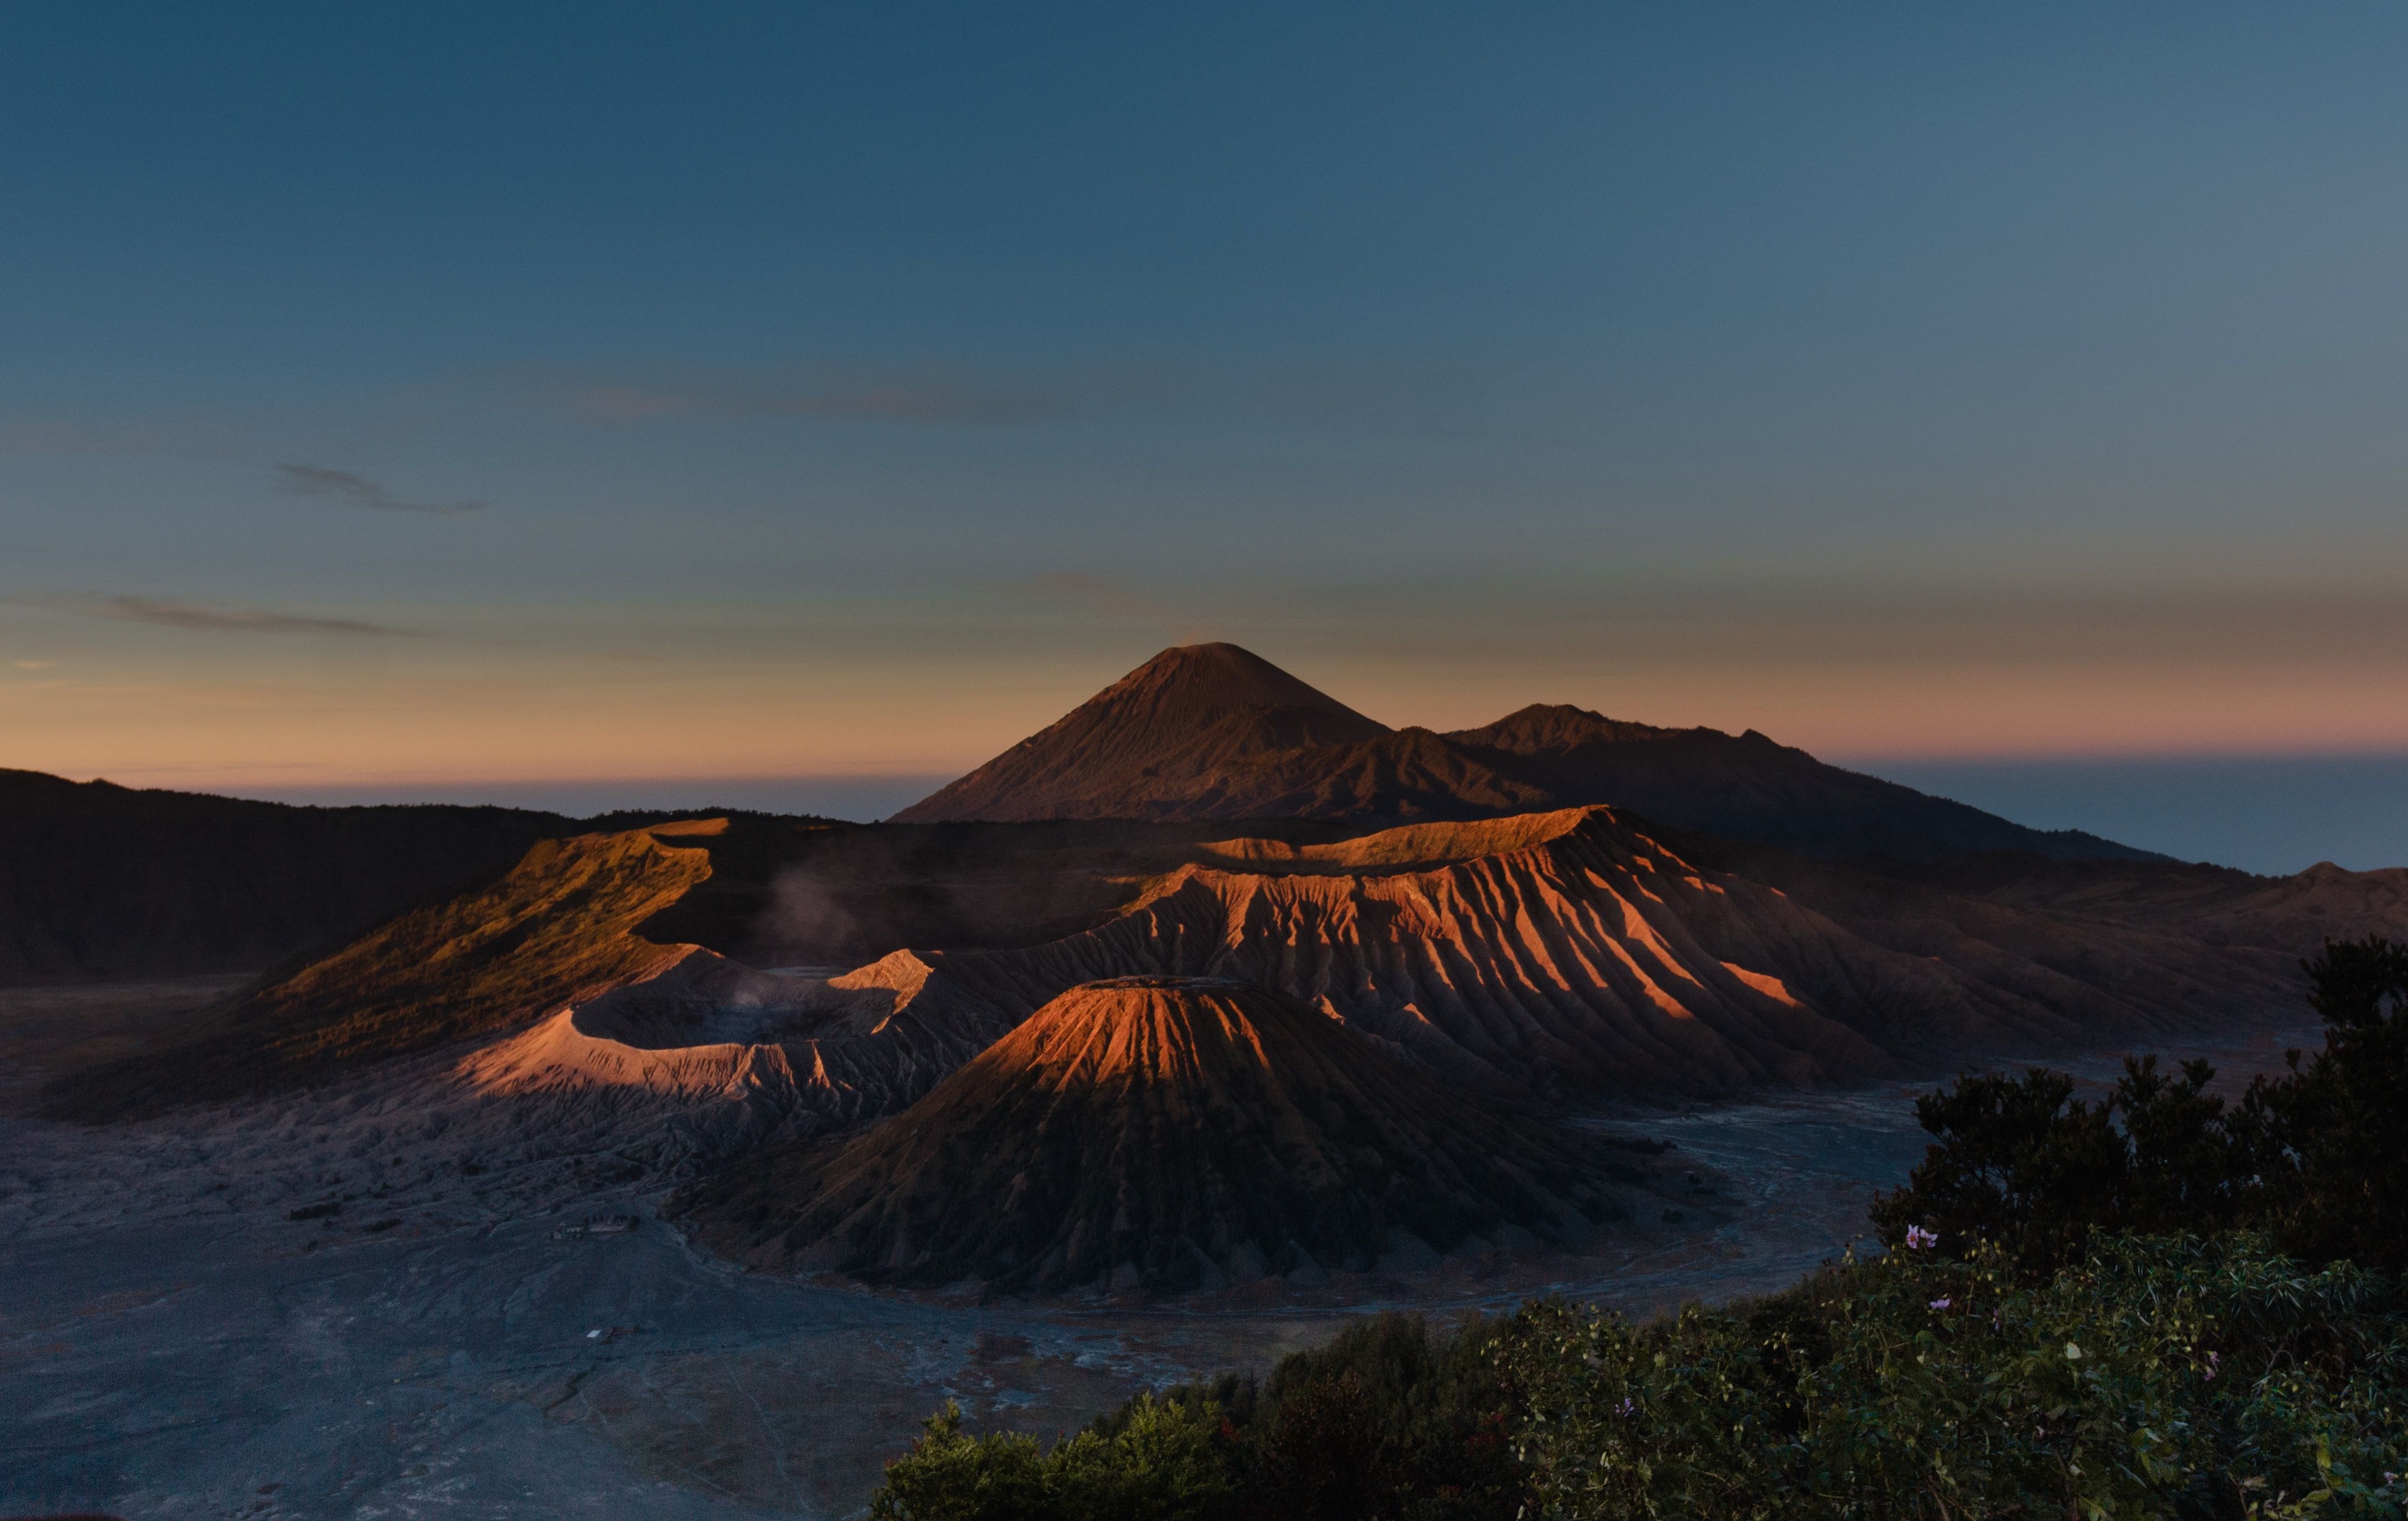 Mount Bromo Picture. Download Free Image